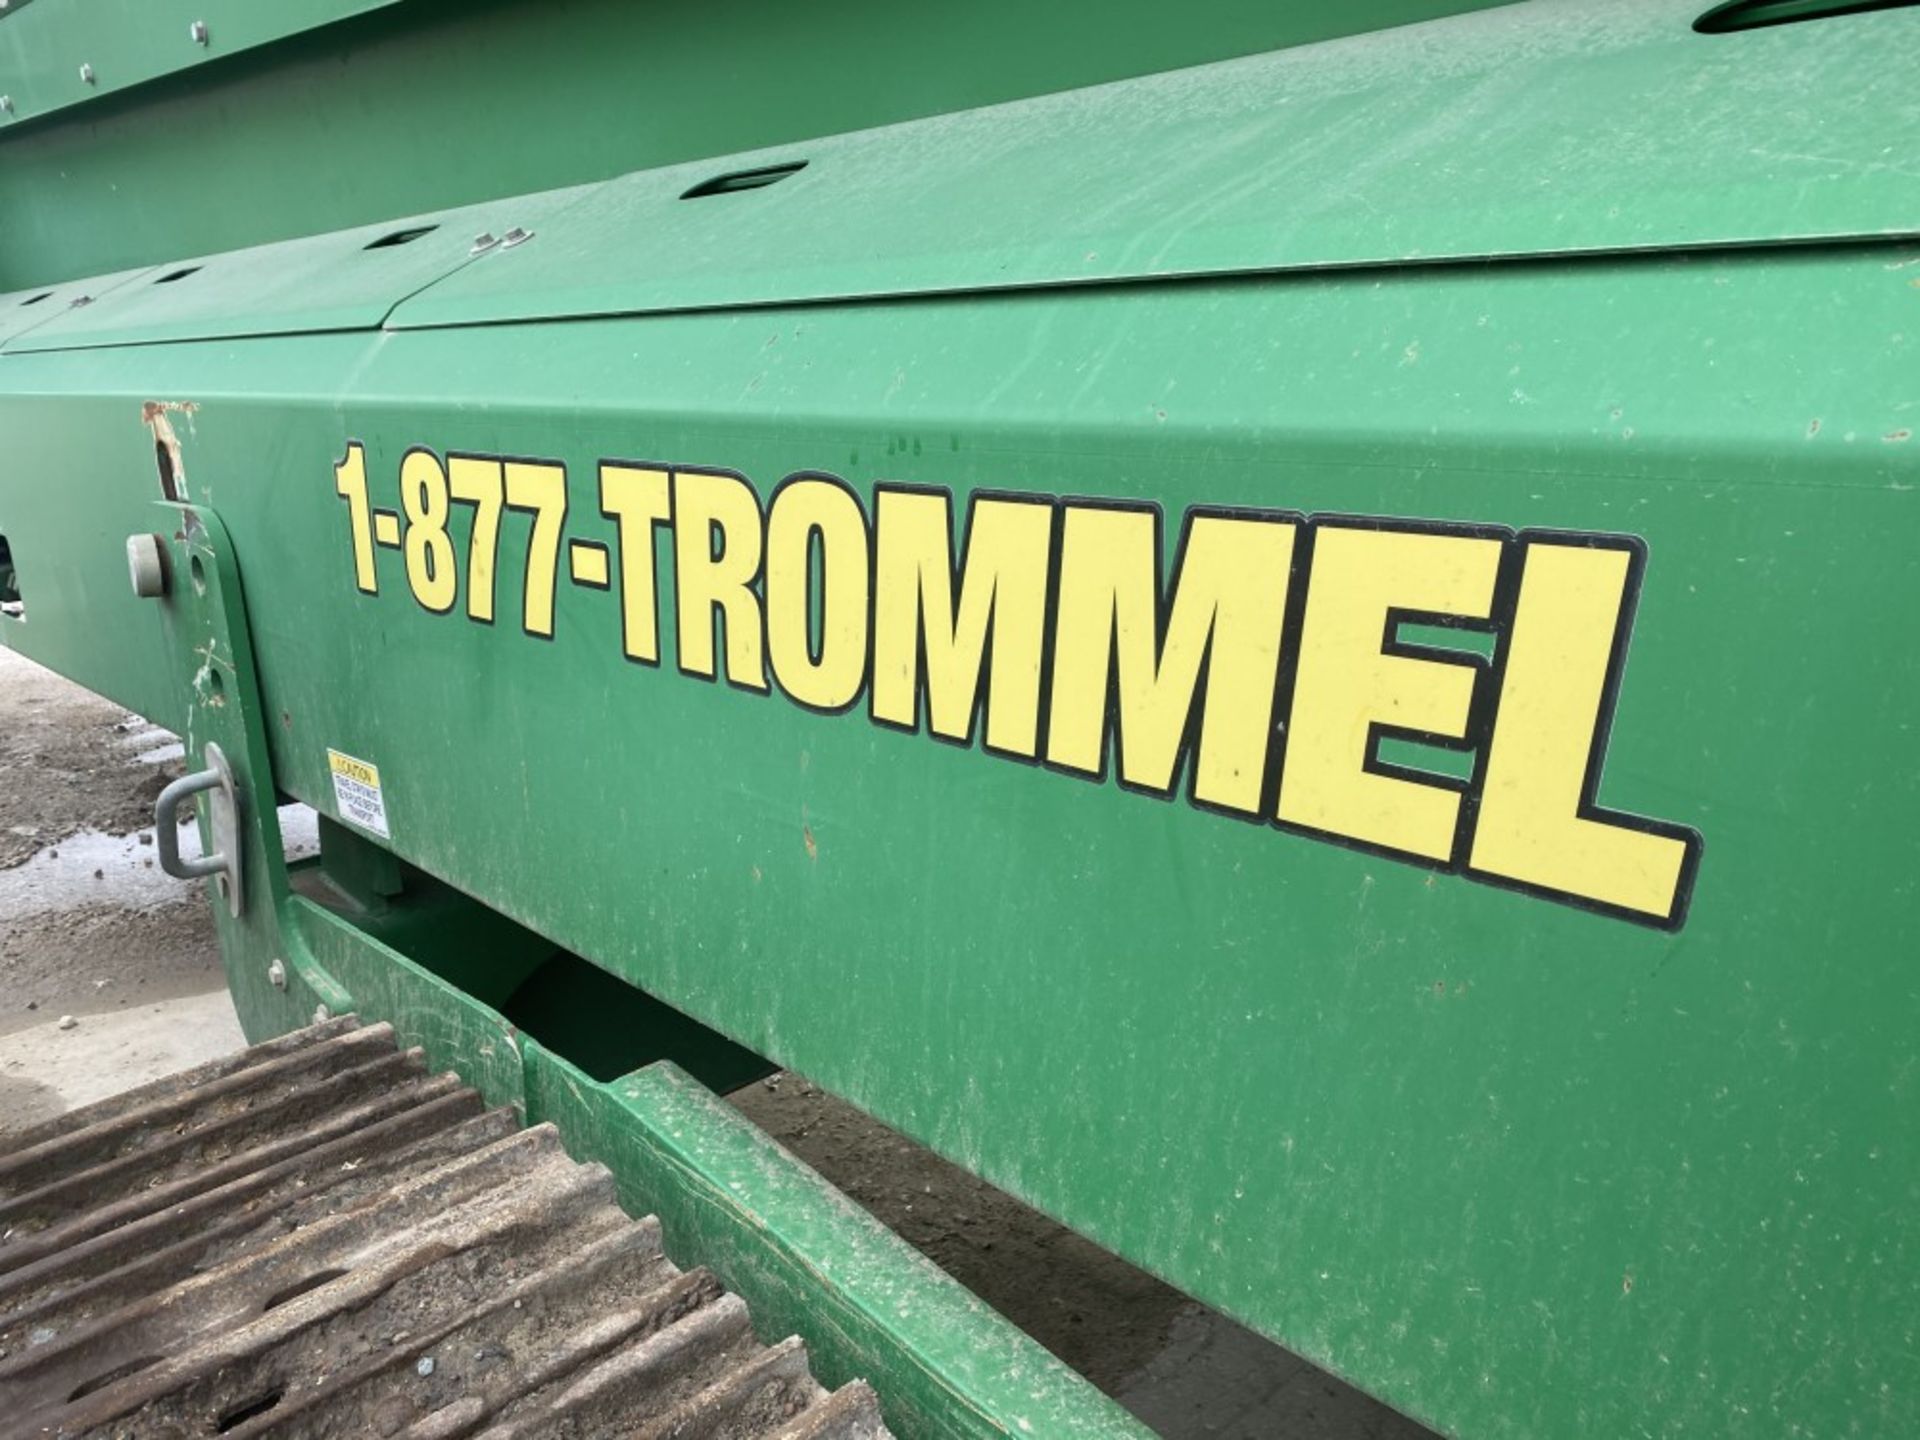 2016 McCLOSKEY 516 1-877-TROMMEL POWER SCREEDER (LOCATION BURNLEY) 2242 HOURS (RING FOR COLLECTION - Image 6 of 7